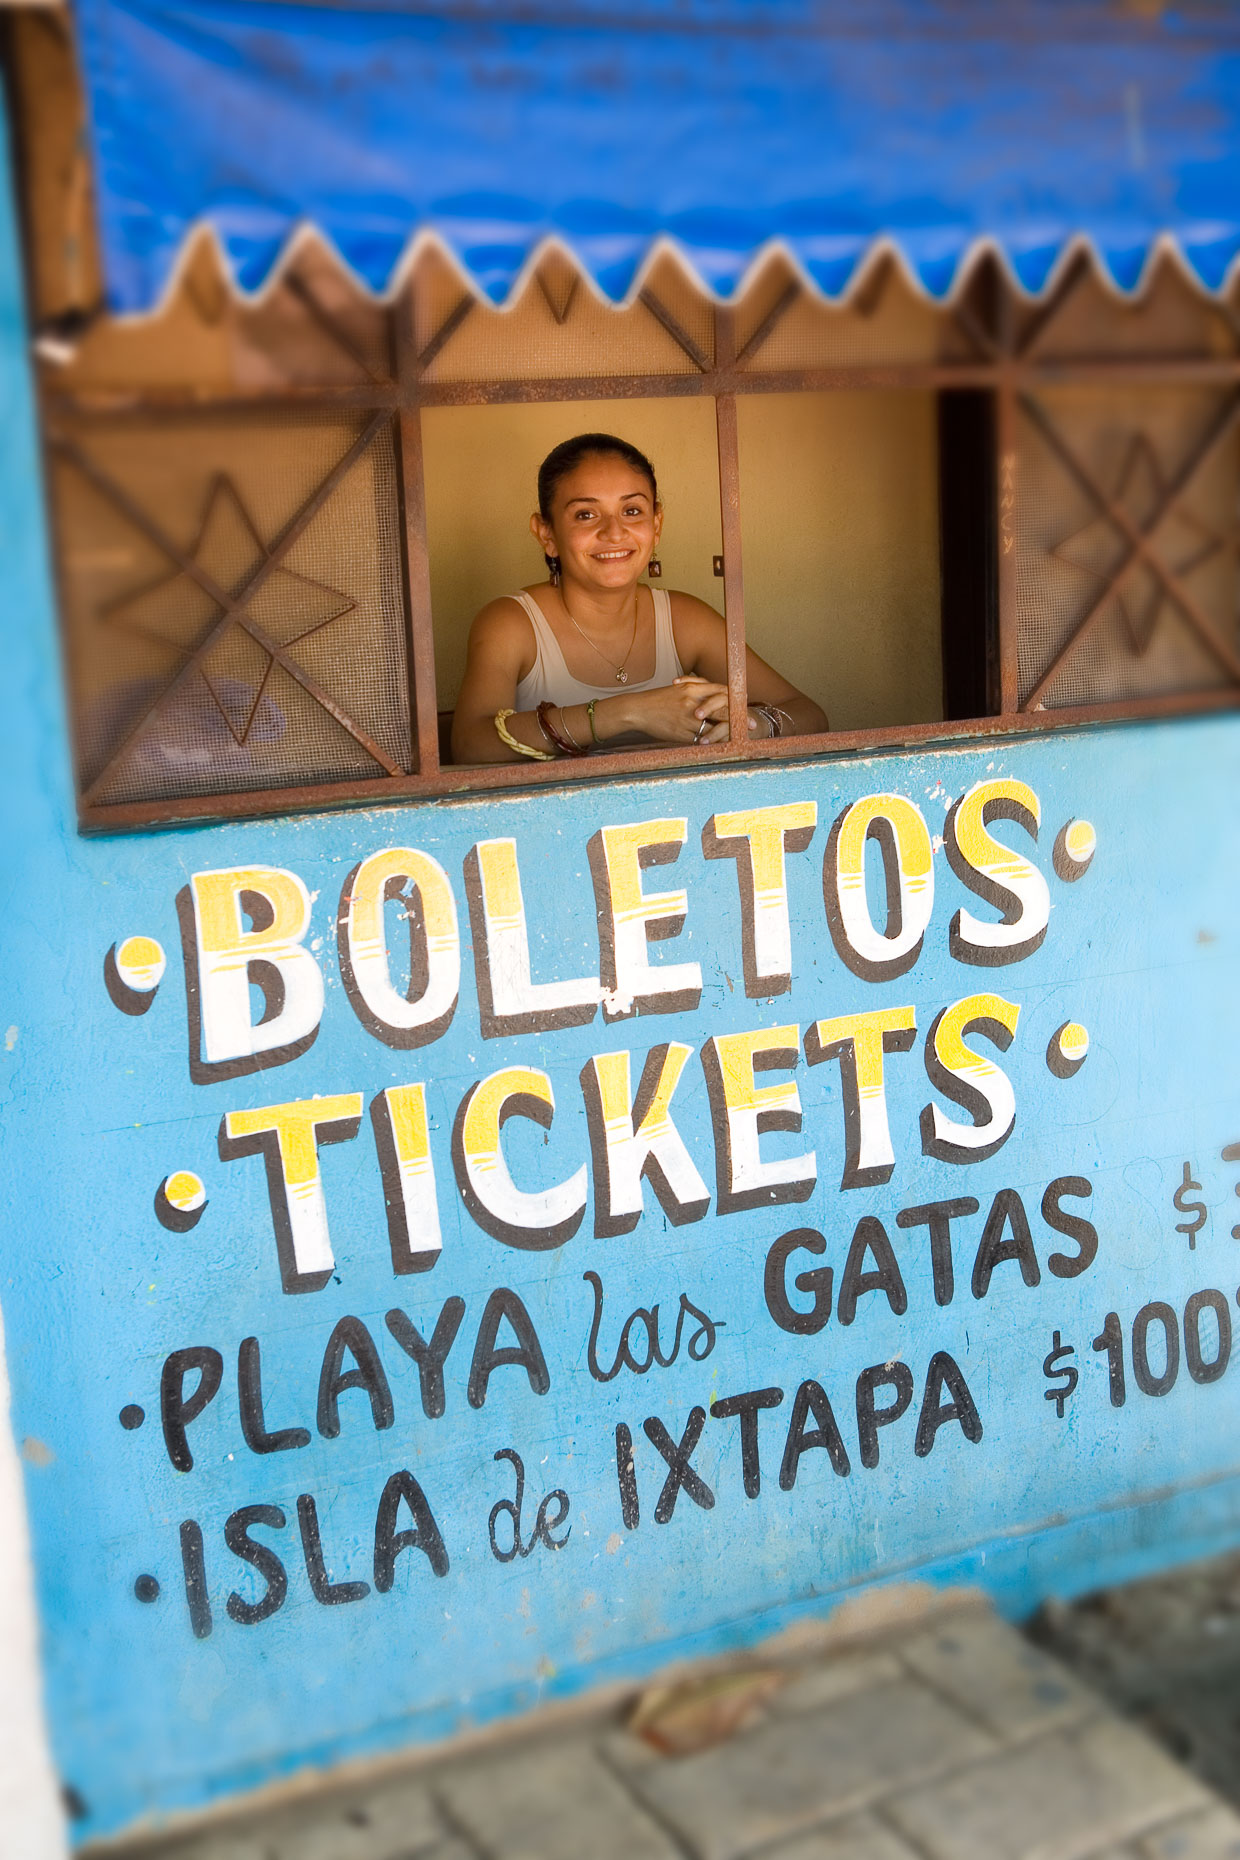 Woman female in ticket booth in Zihuatanejo Mexico.